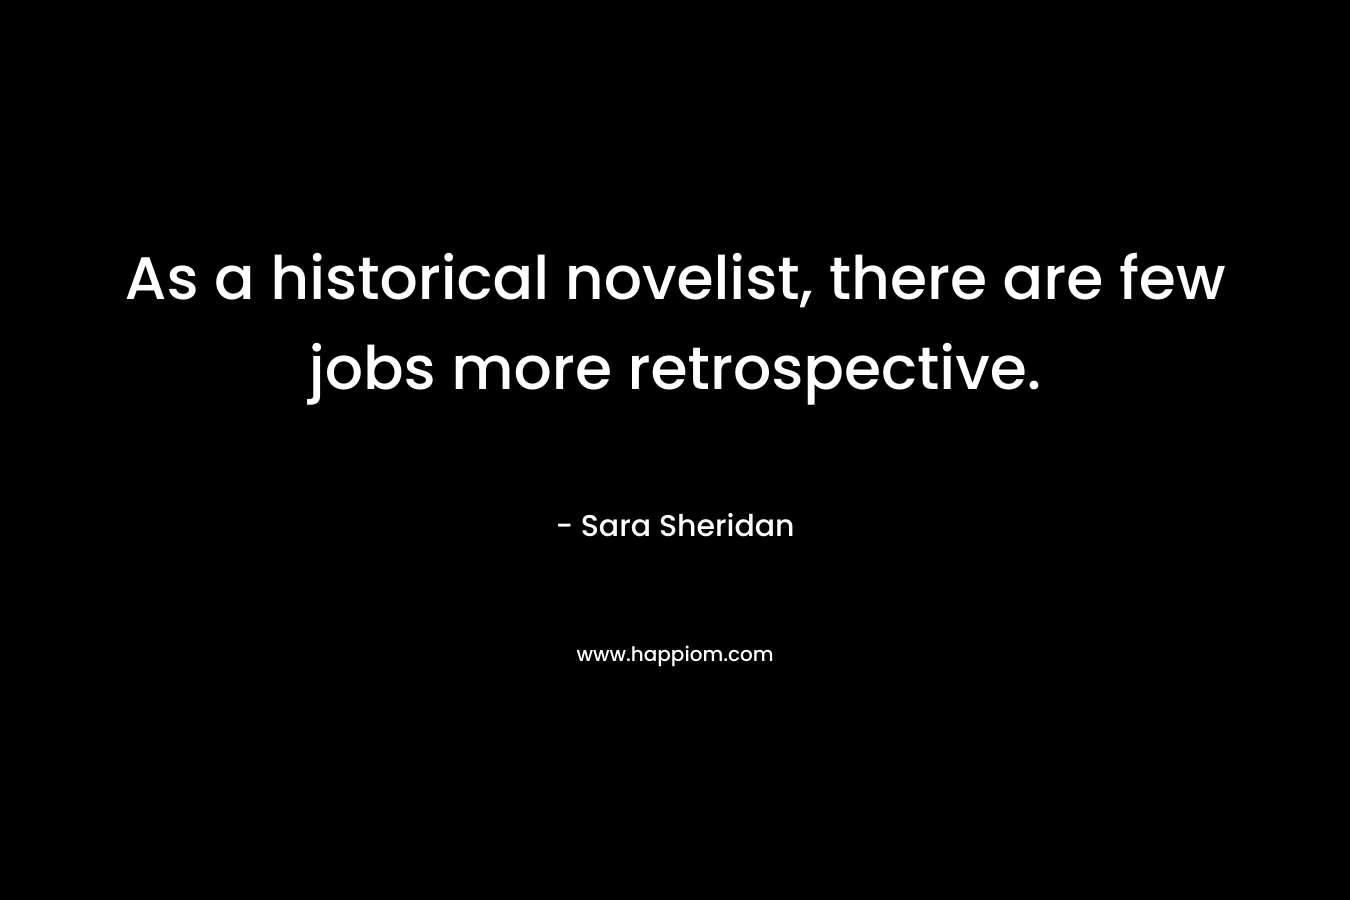 As a historical novelist, there are few jobs more retrospective. – Sara Sheridan